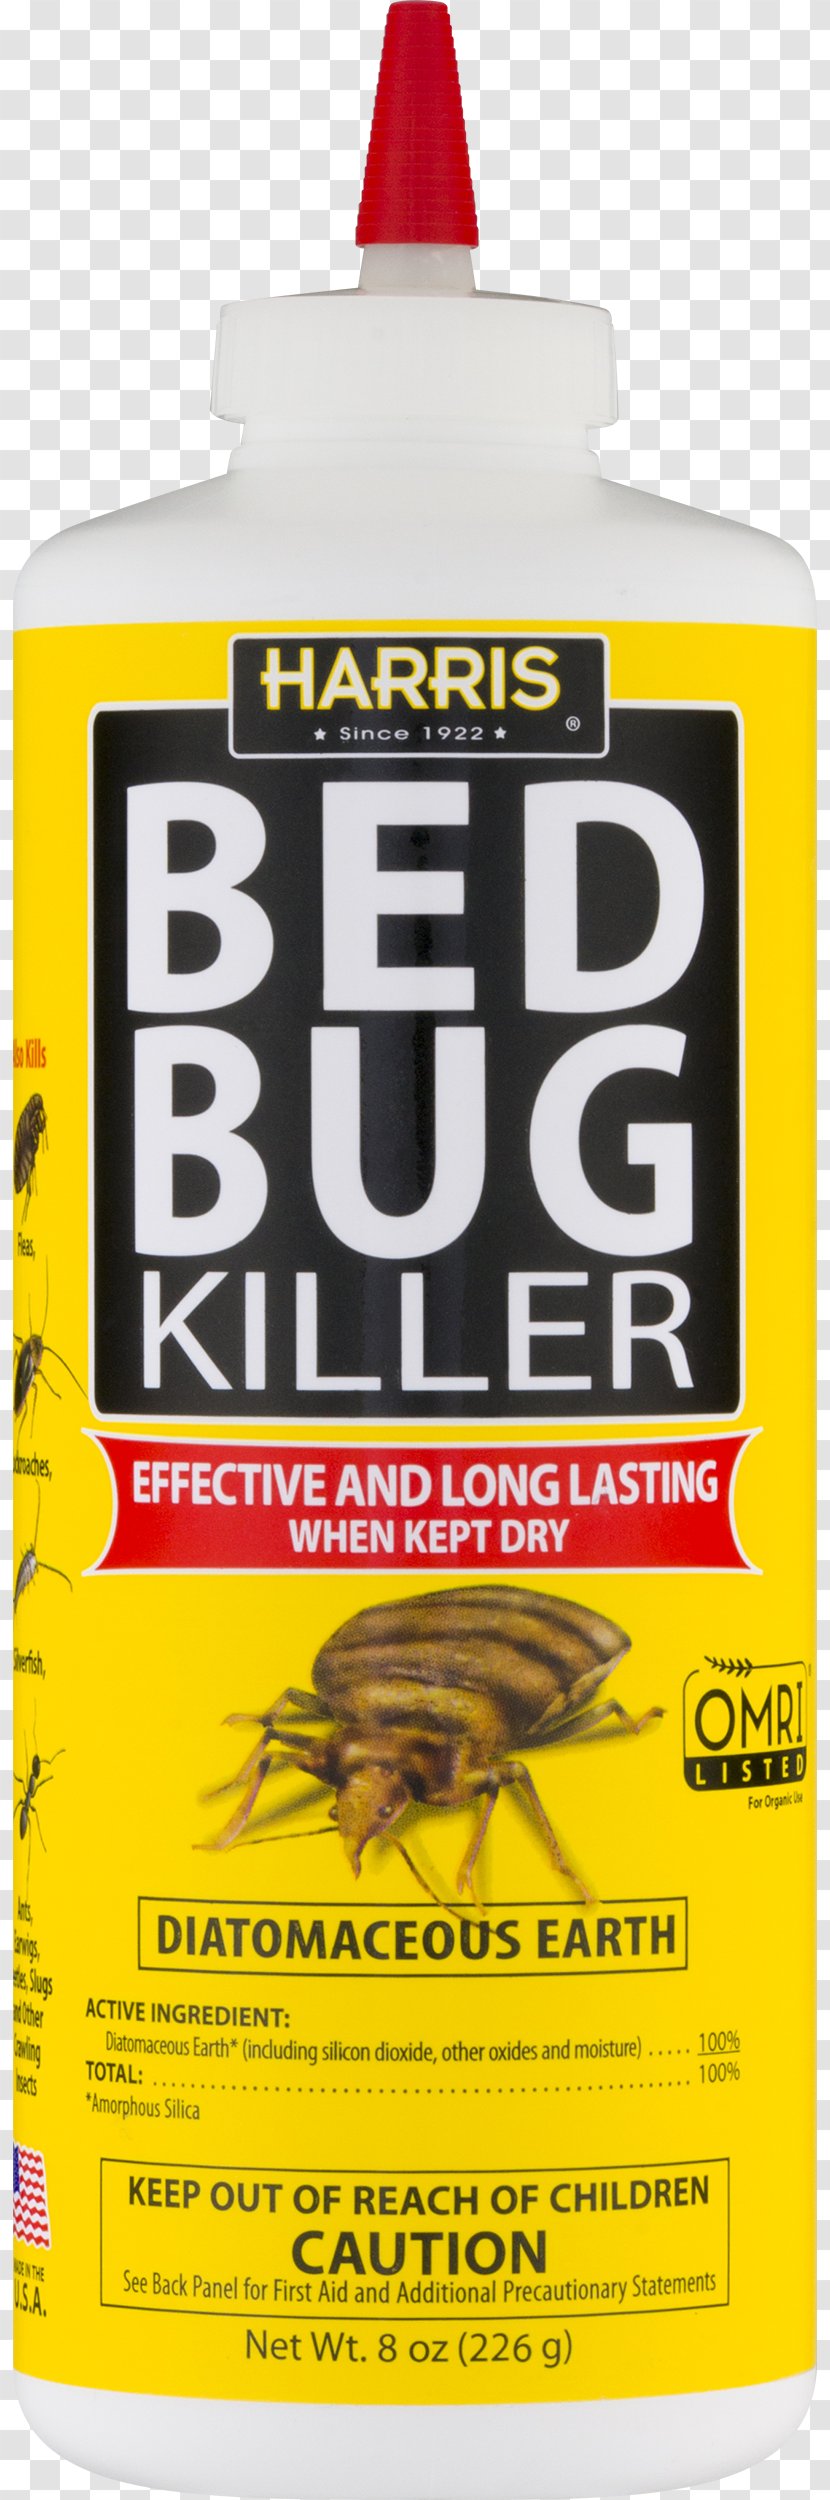 Insect Diatomaceous Earth Bed Bug Powder Dust - Electronic Pest Control Transparent PNG